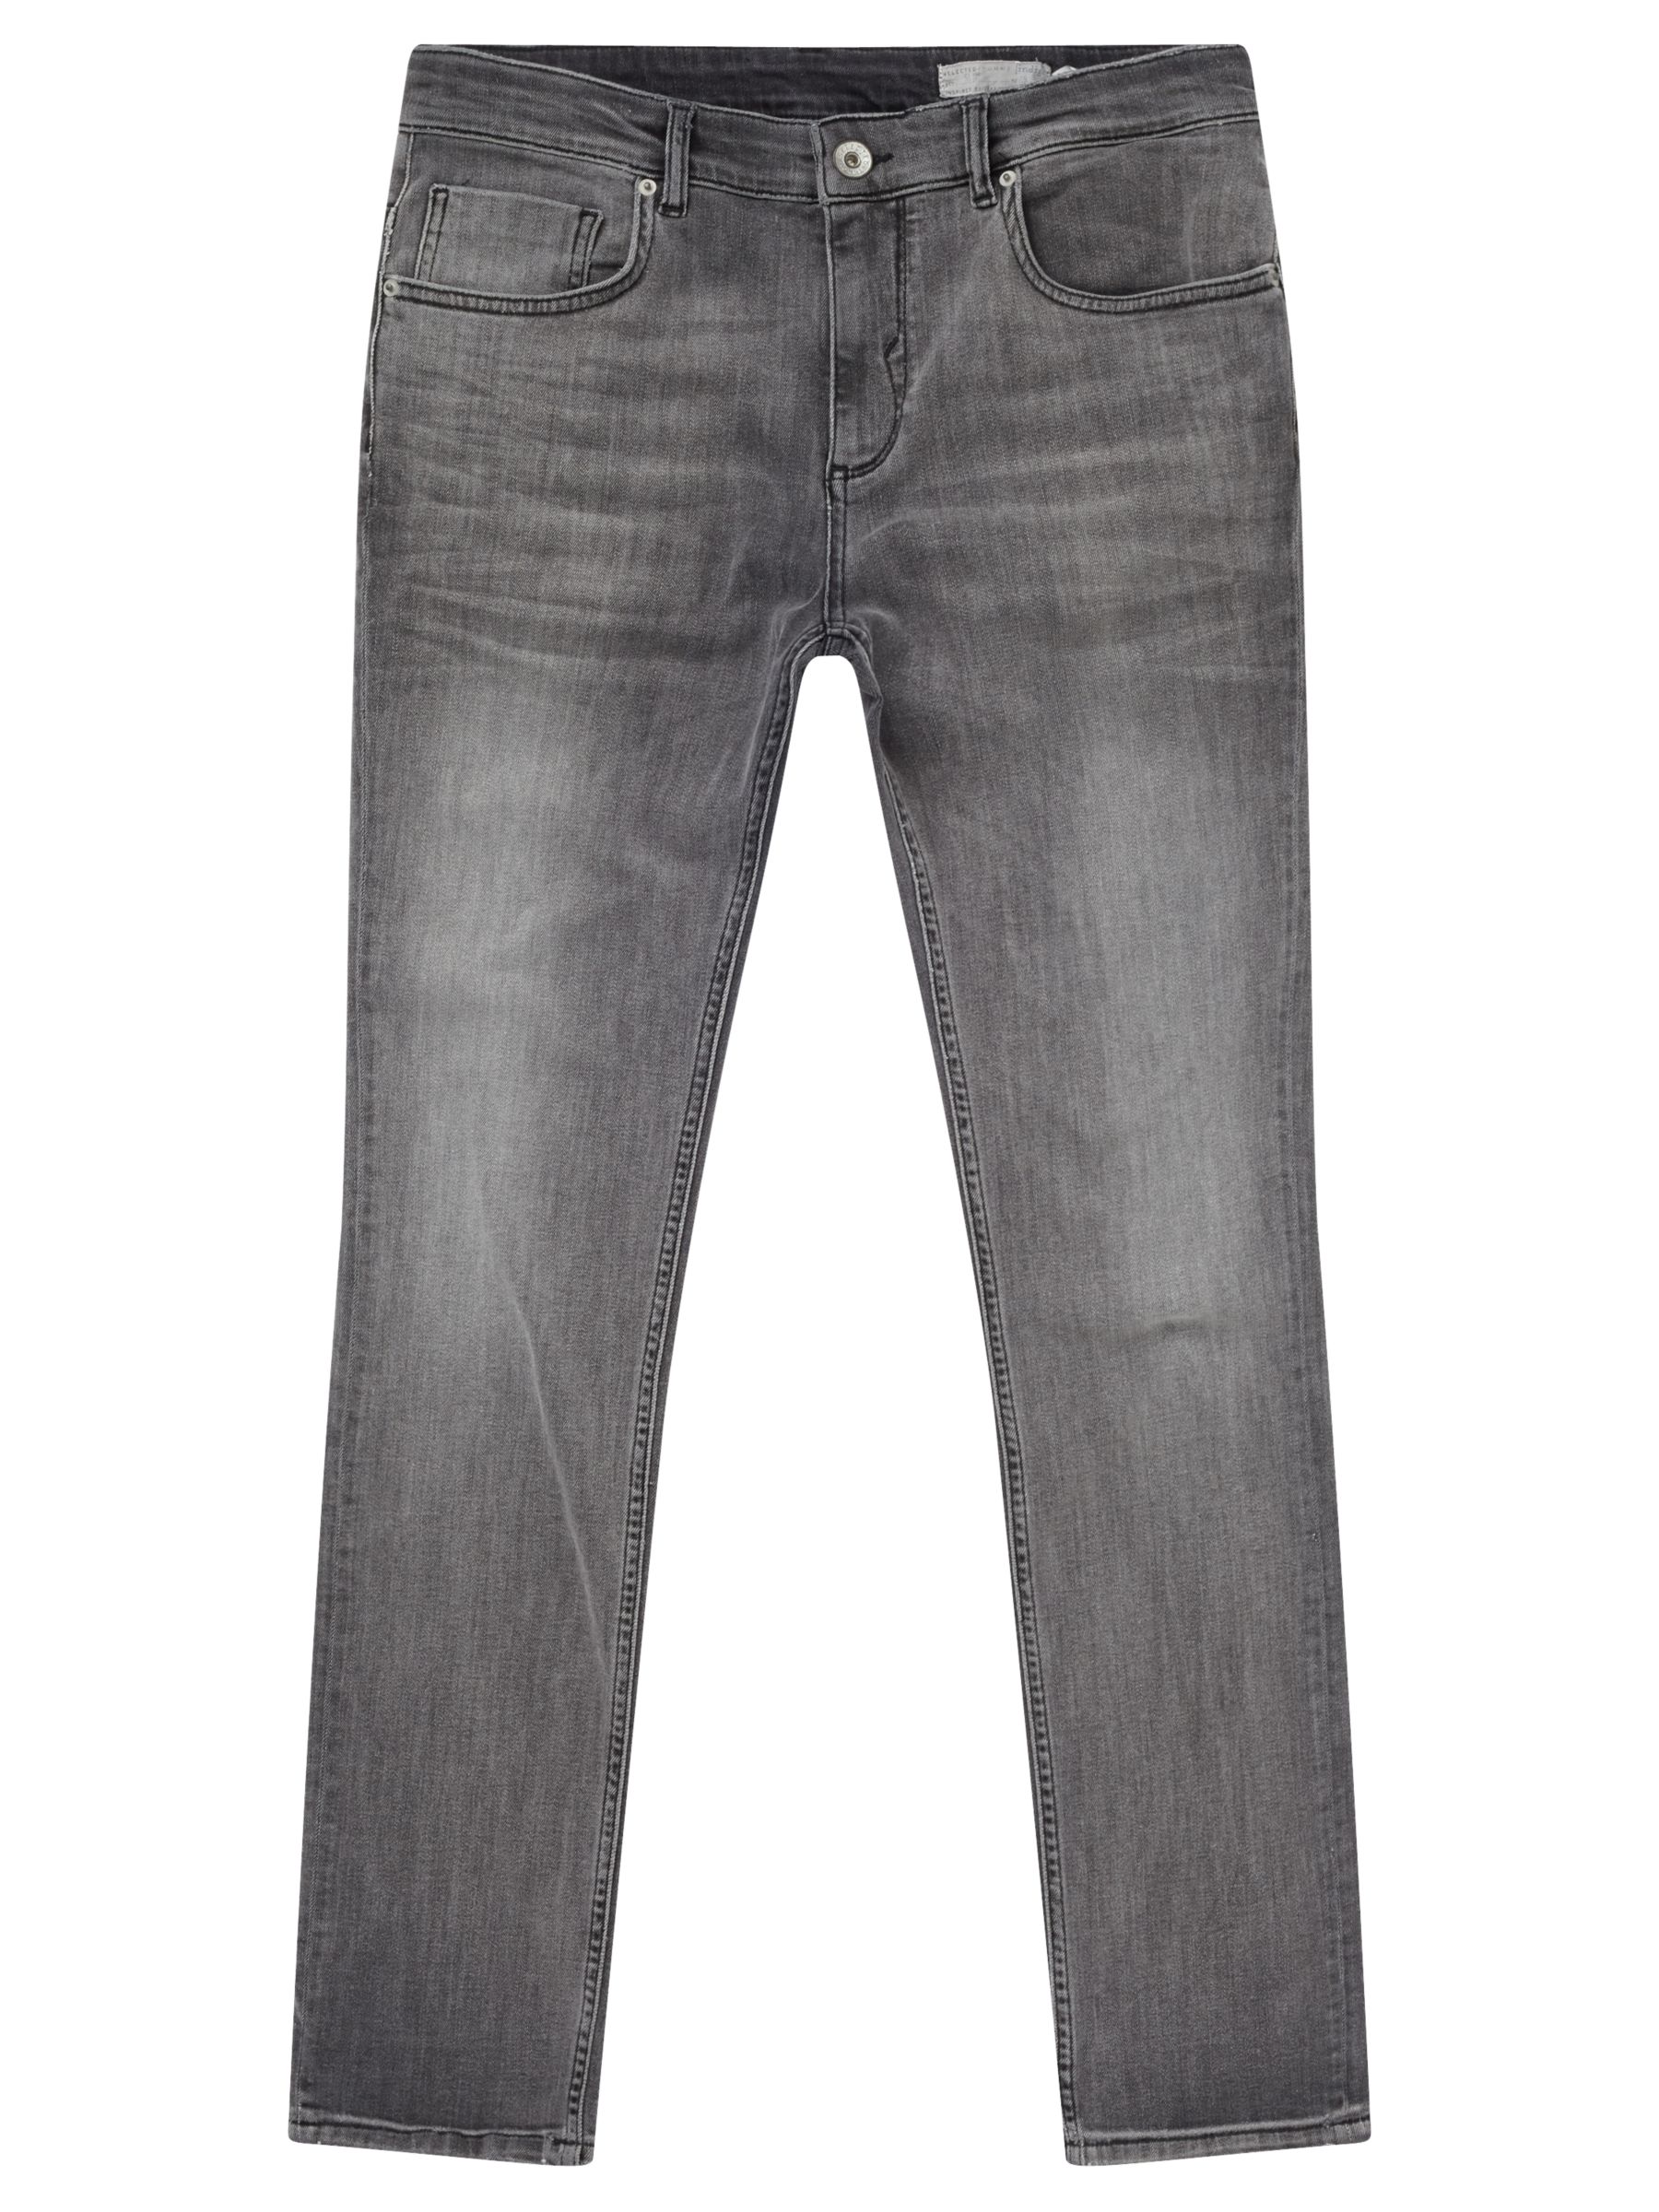 Selected Homme Mario Slim Jeans, Grey, 32S